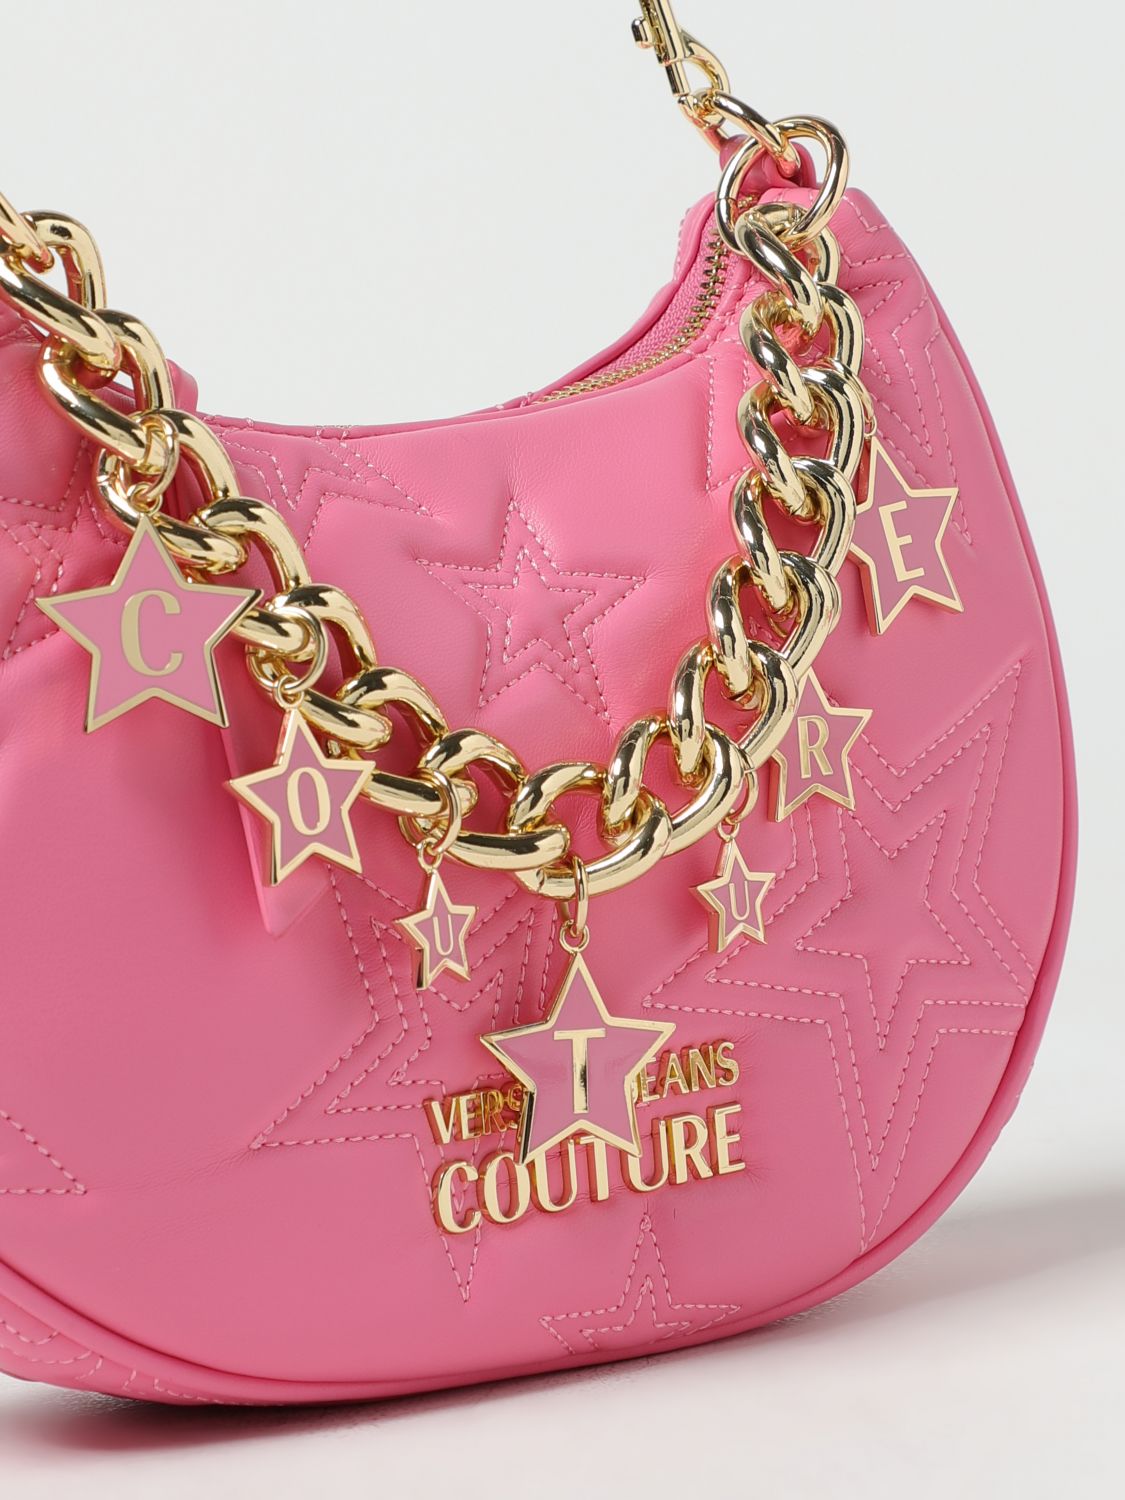 Versace Jeans Couture Bag in Synthetic Nappa with Mirror